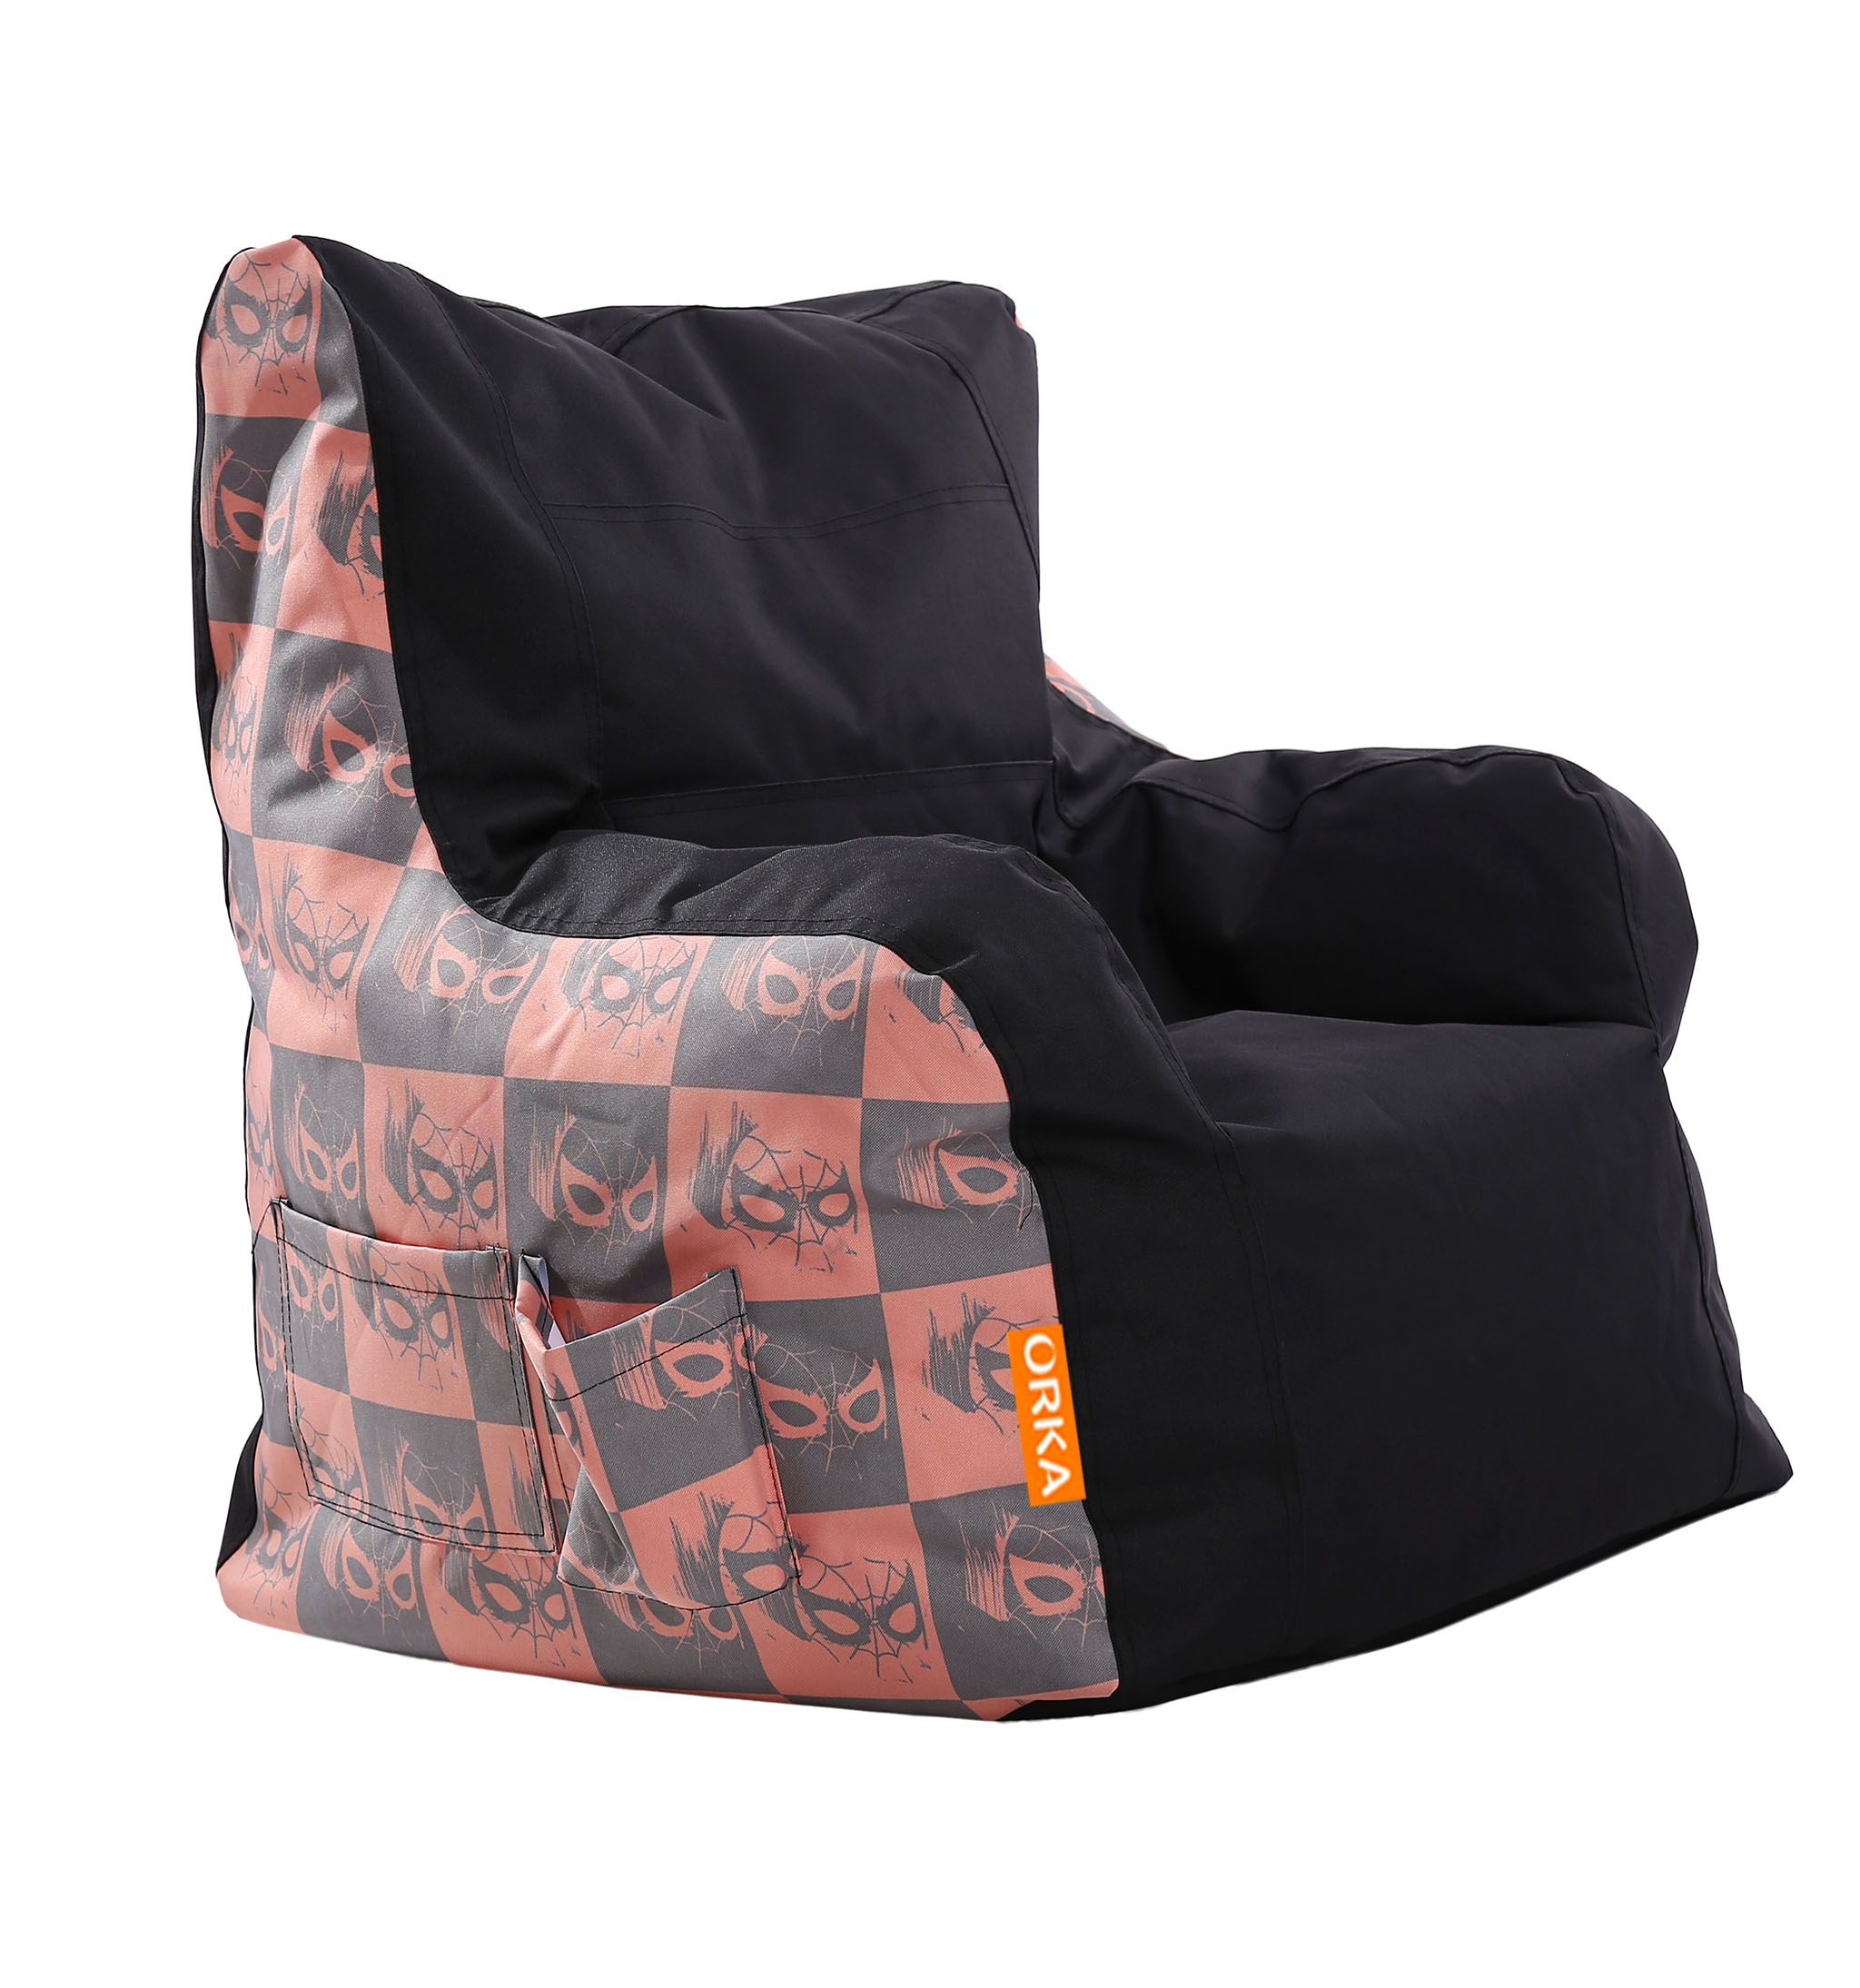 Orka Spiderman Digital Printed Arm Chair Filled With Beans